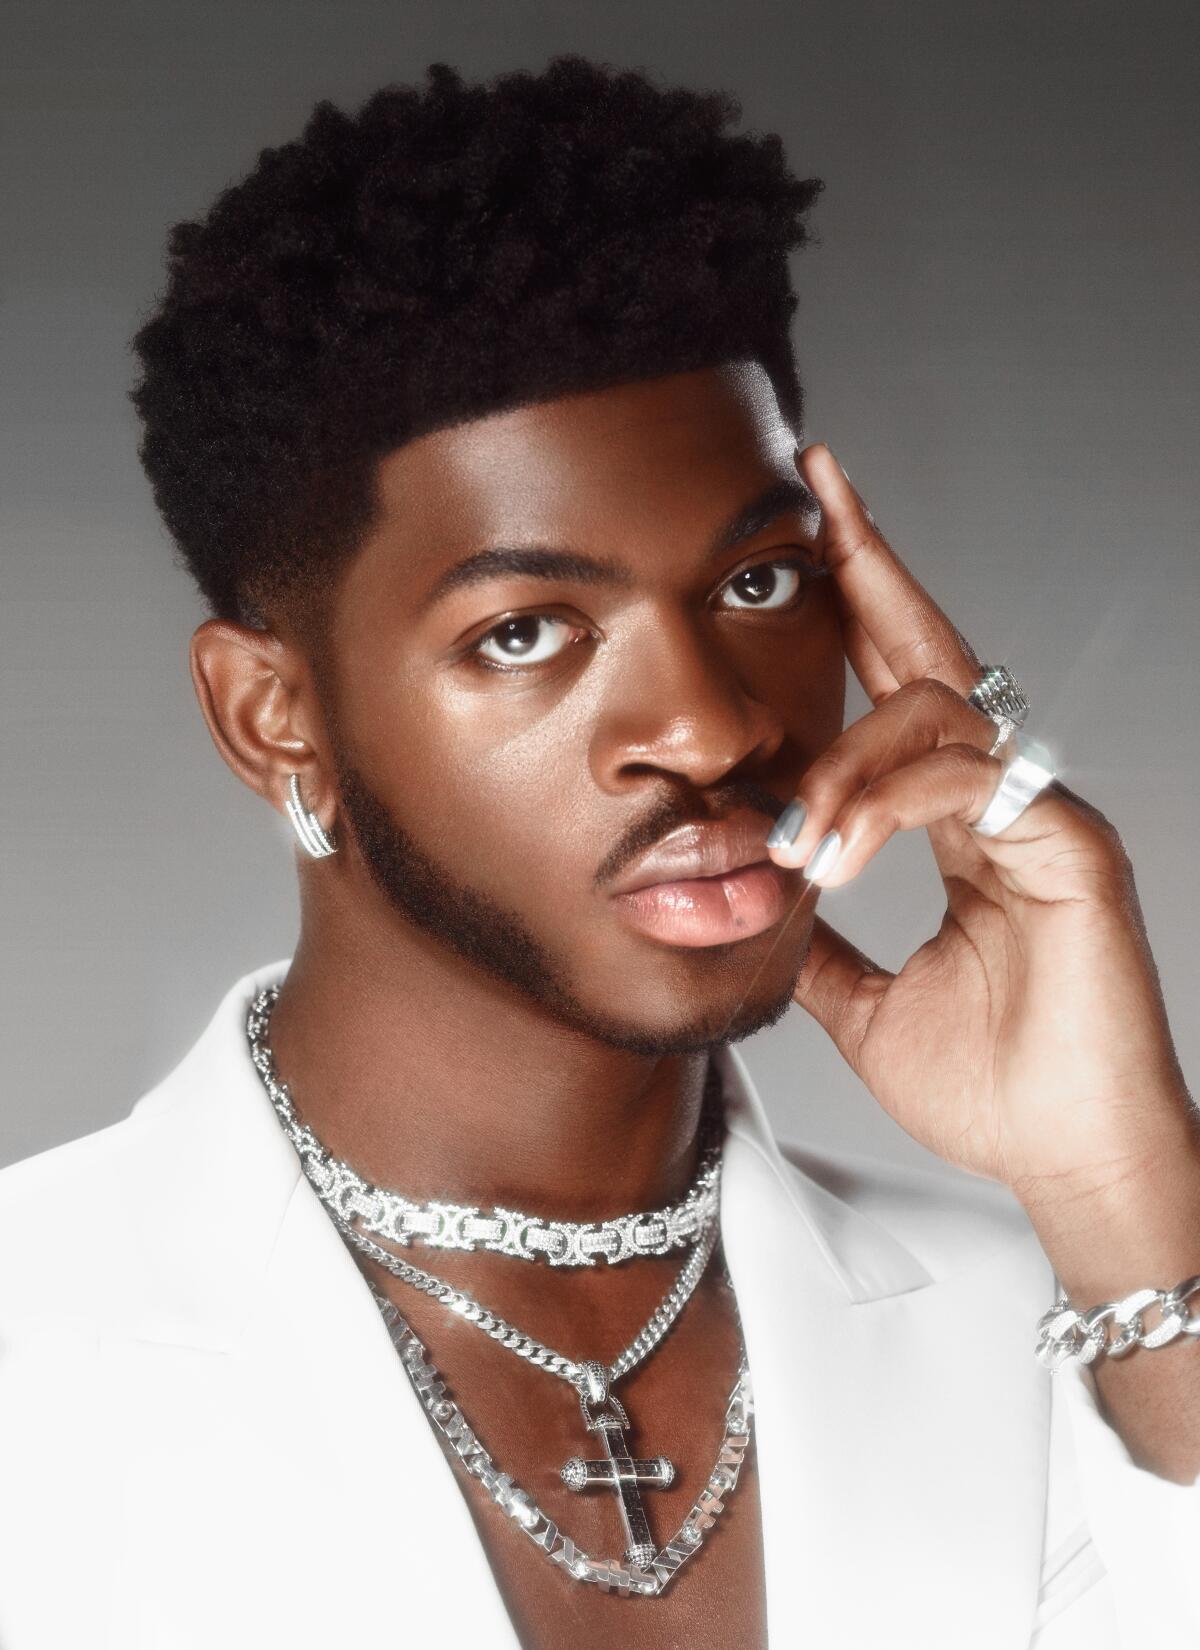 Lil Nas X triumphs over haters and homophobes on 'Montero' - Los